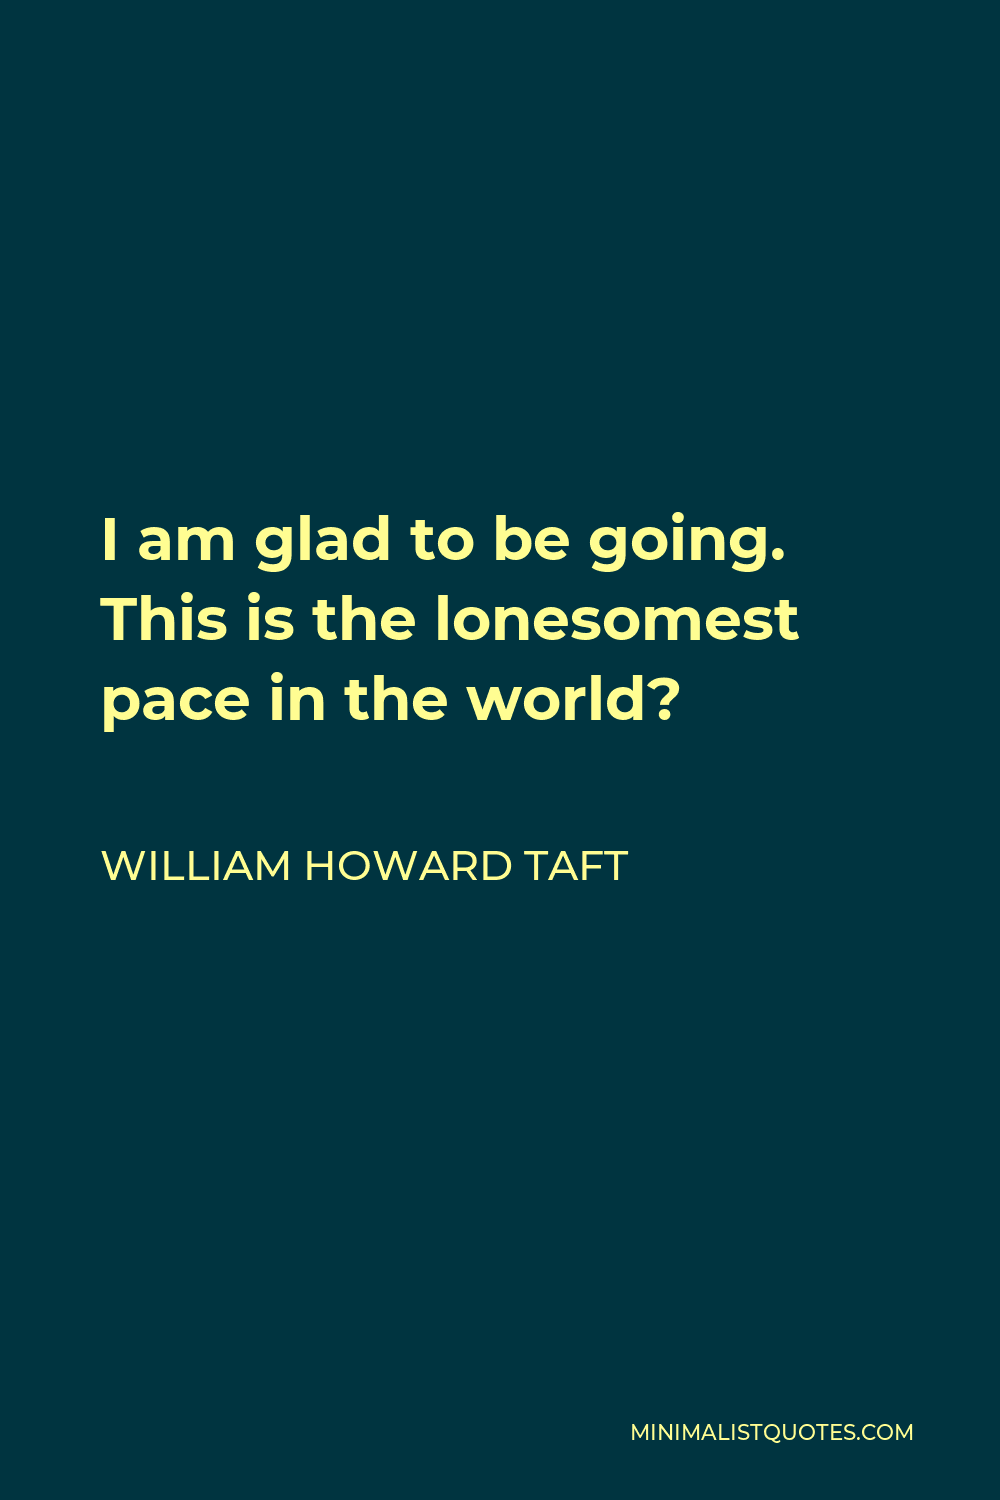 William Howard Taft Quote - I am glad to be going. This is the lonesomest pace in the world?